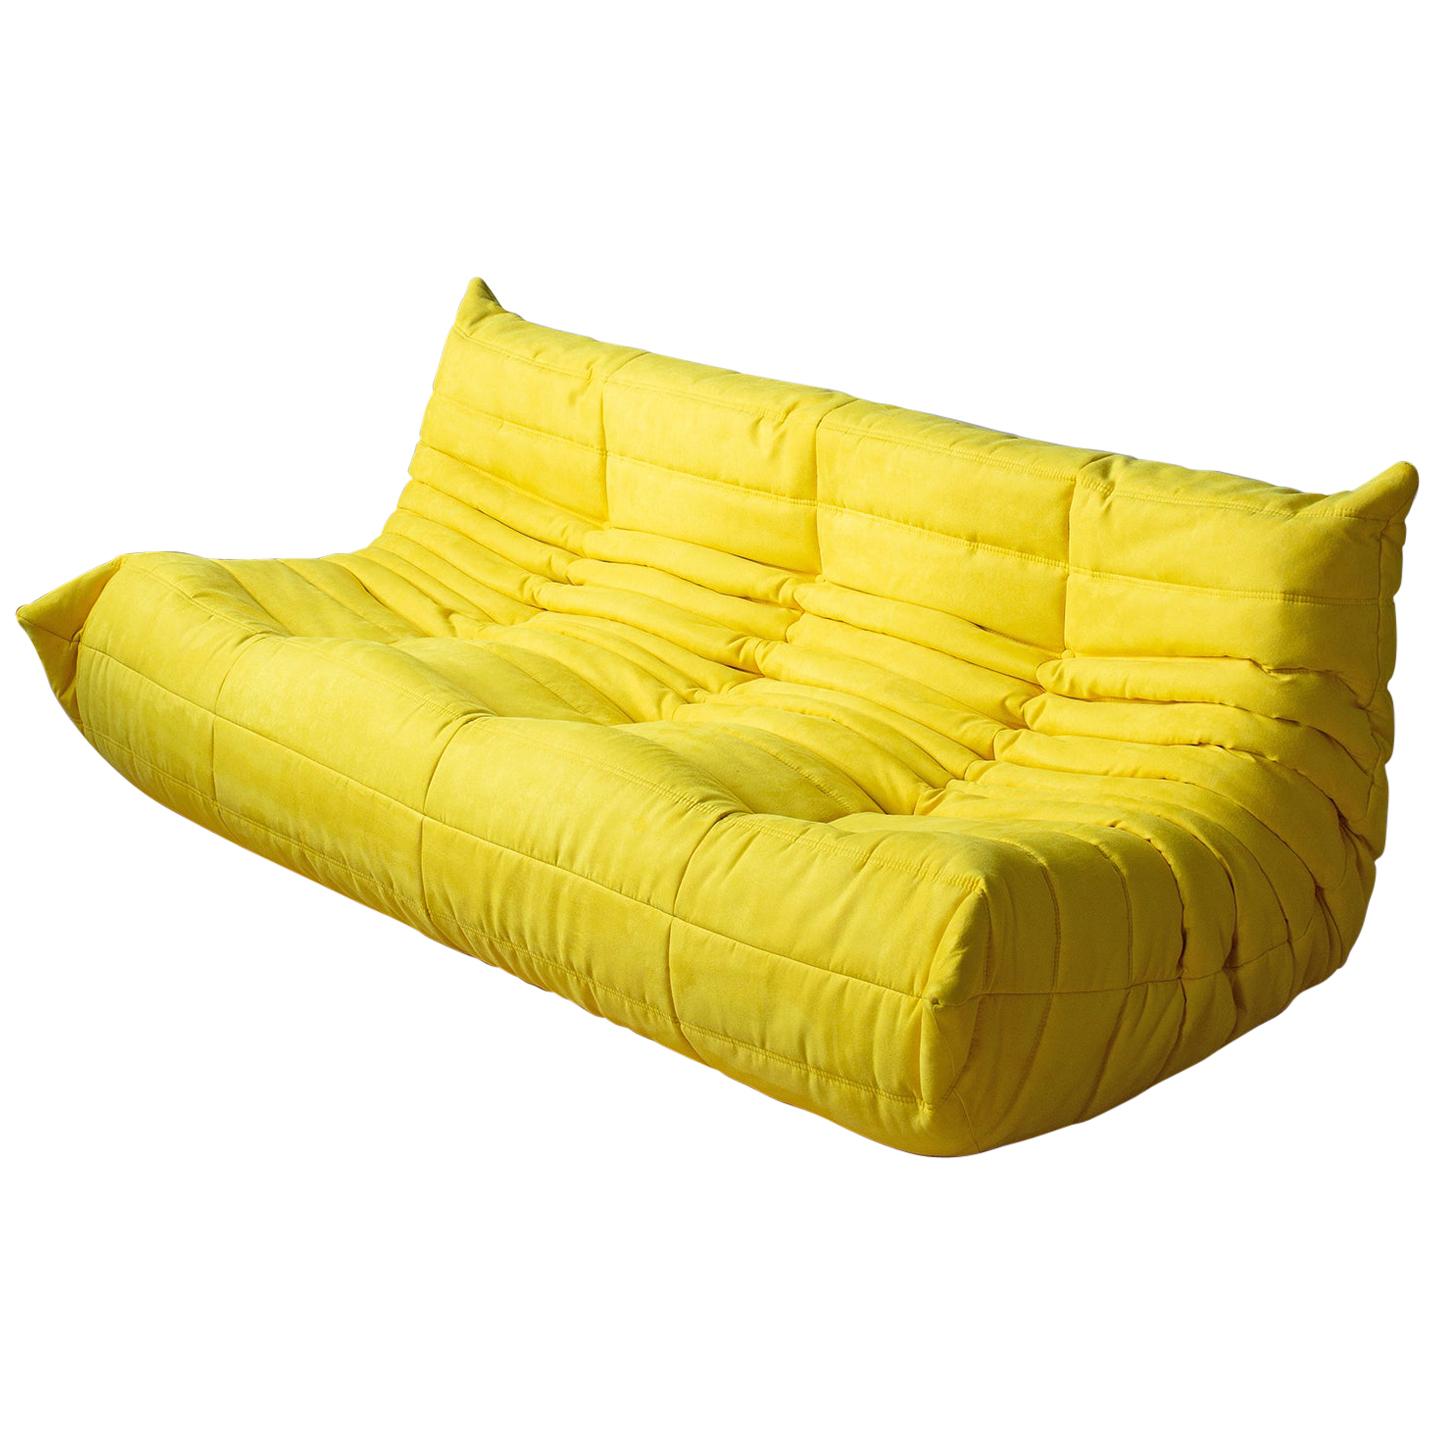 Togo 3-Seat Sofa in Yellow Microfibre by Michel Ducaroy for Ligne Roset For Sale